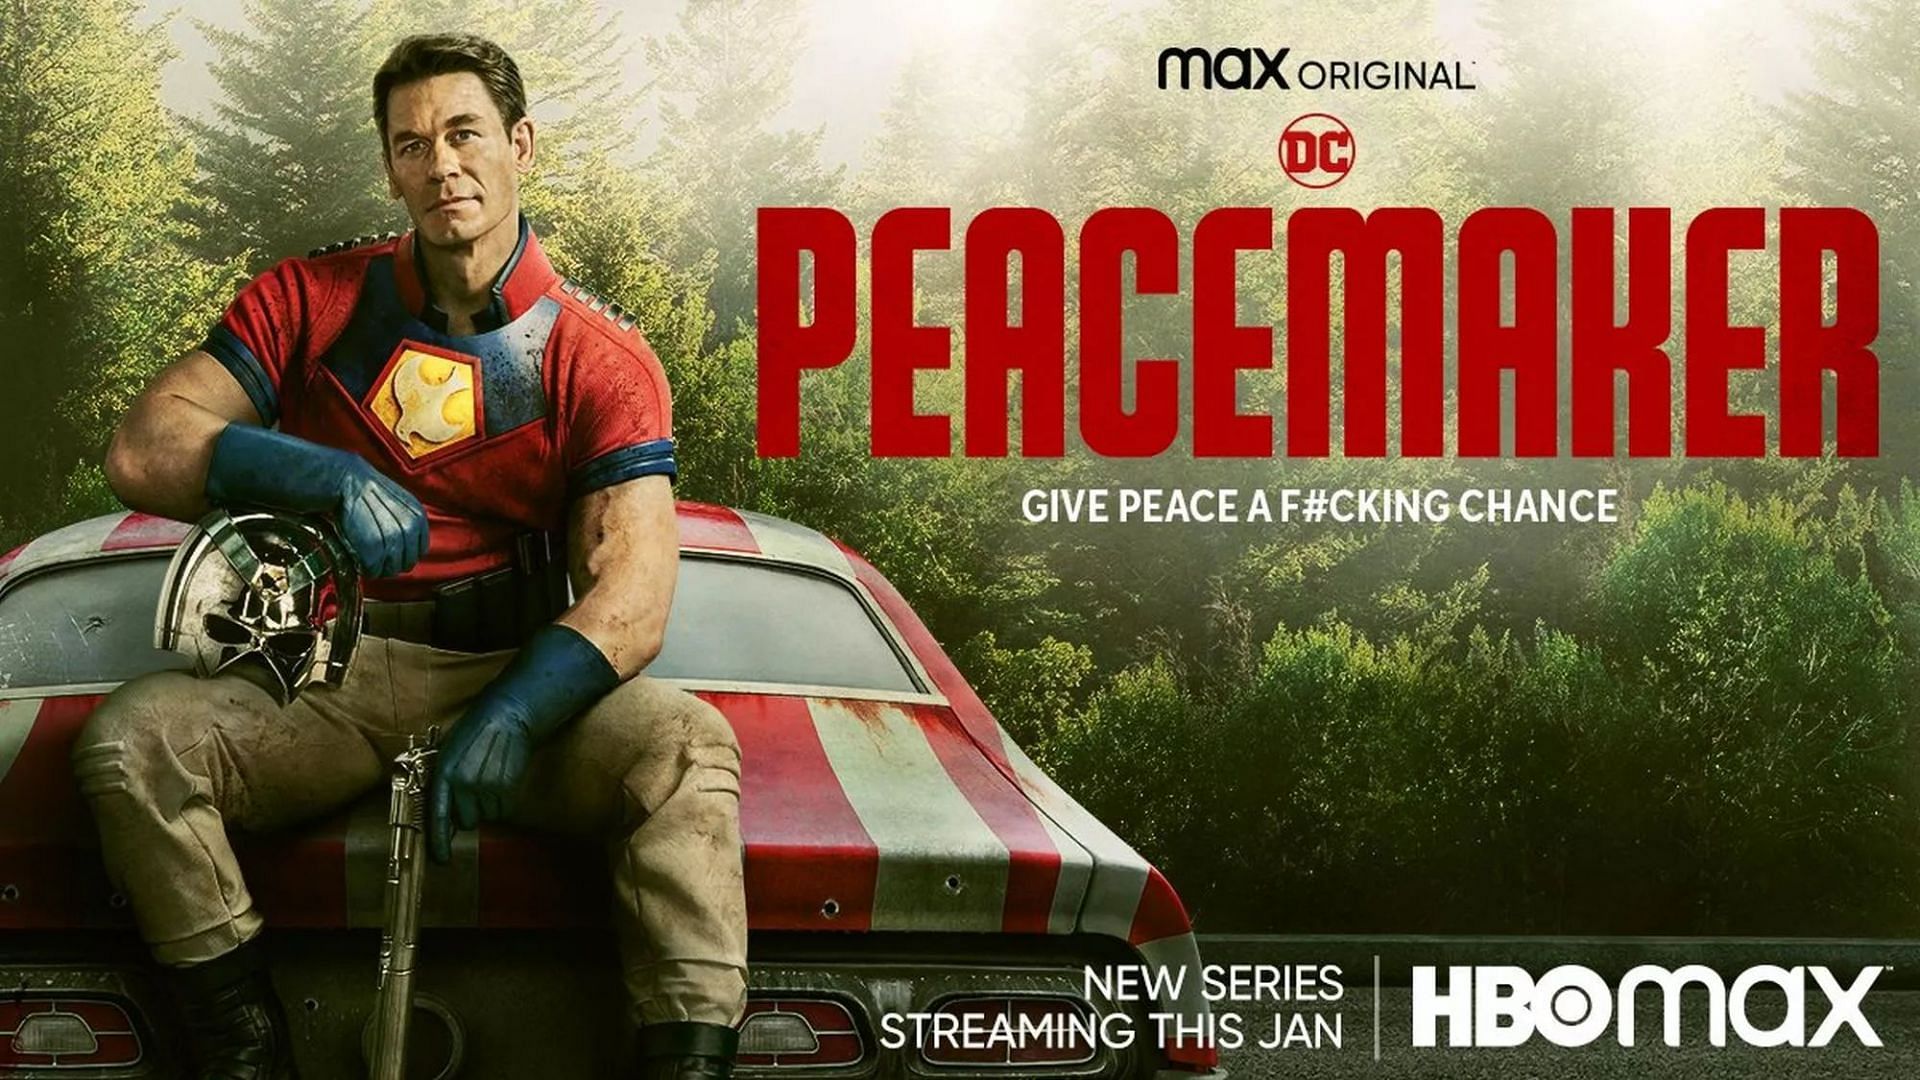 The Peacemaker (Image via HBO Max)